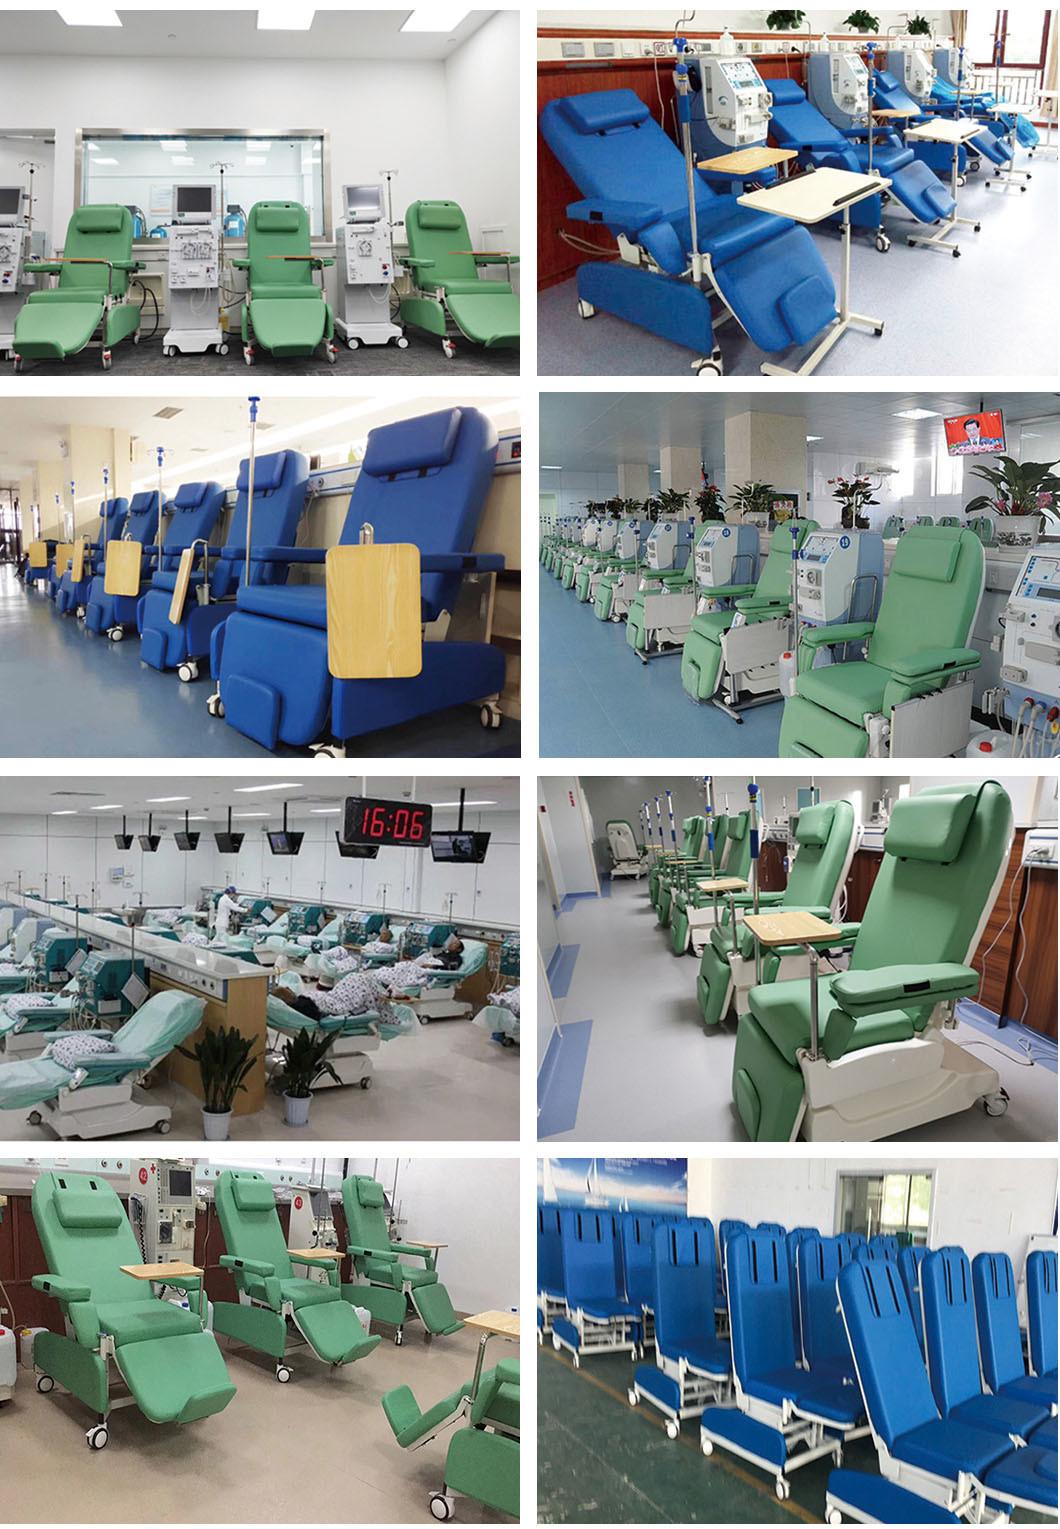 Hospital Medical Folded Blood Collection Chair Chair Dental Chair Infusion Electric Dialysis Chair